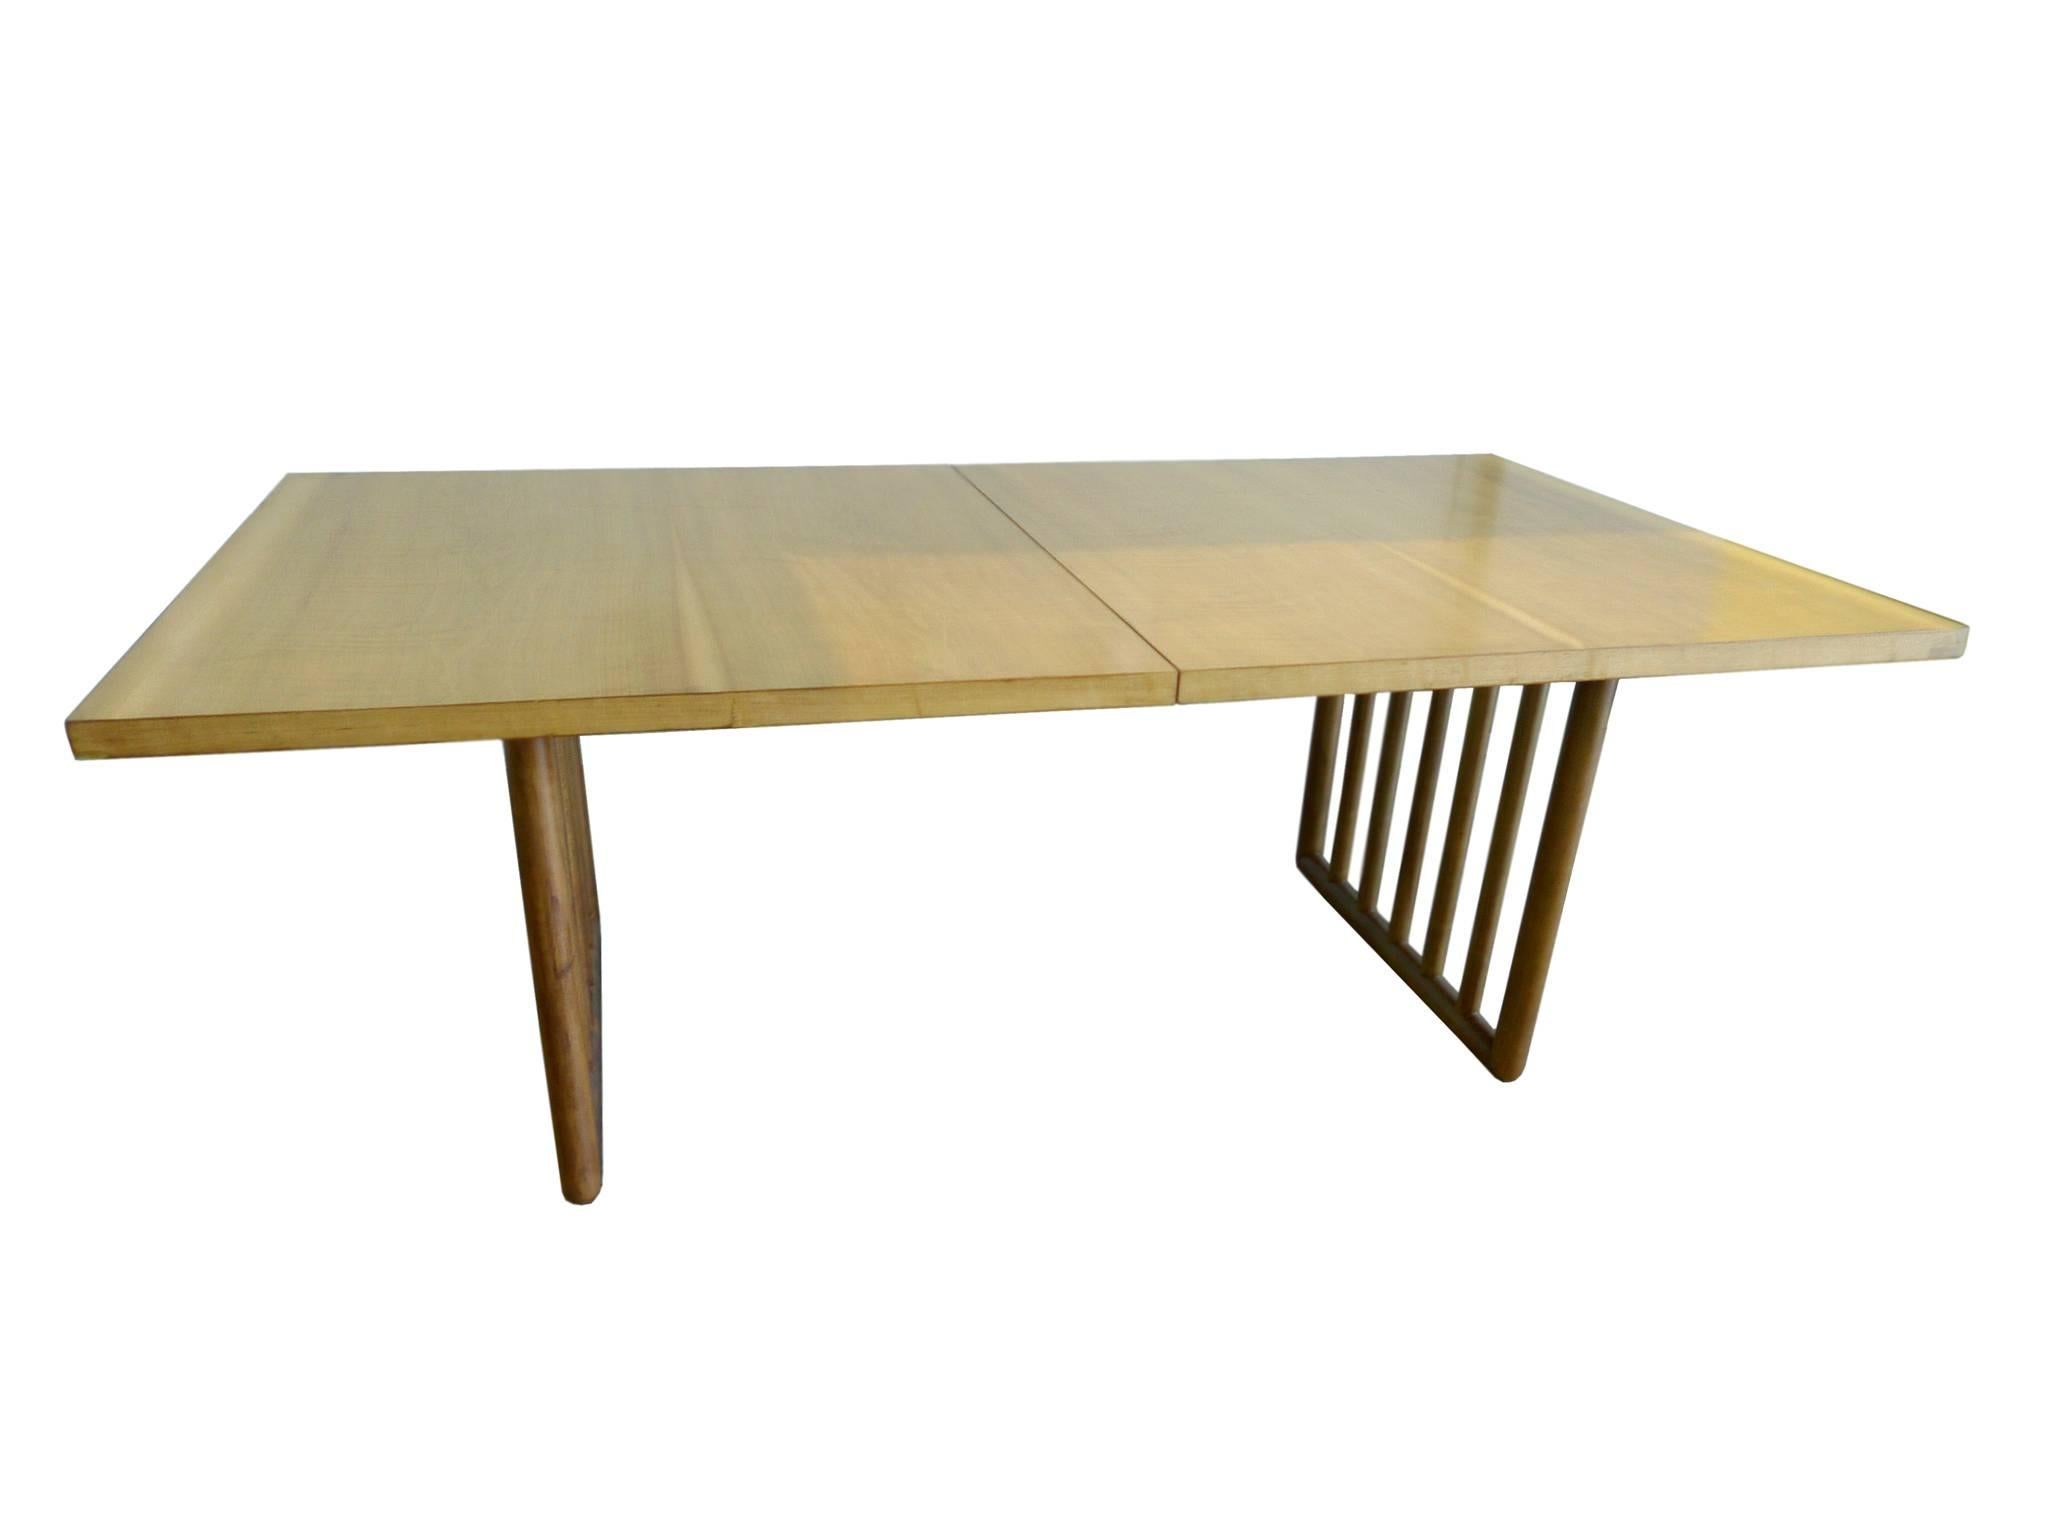 This mid-20th century Robsjohn-Gibbings dining table is beautifully crafted from mahogany. Robsjohn-Gibbings designs were influenced by his love of Classical Greek art; that is apparent in the table’s symmetry and minimalism. There's a sense of